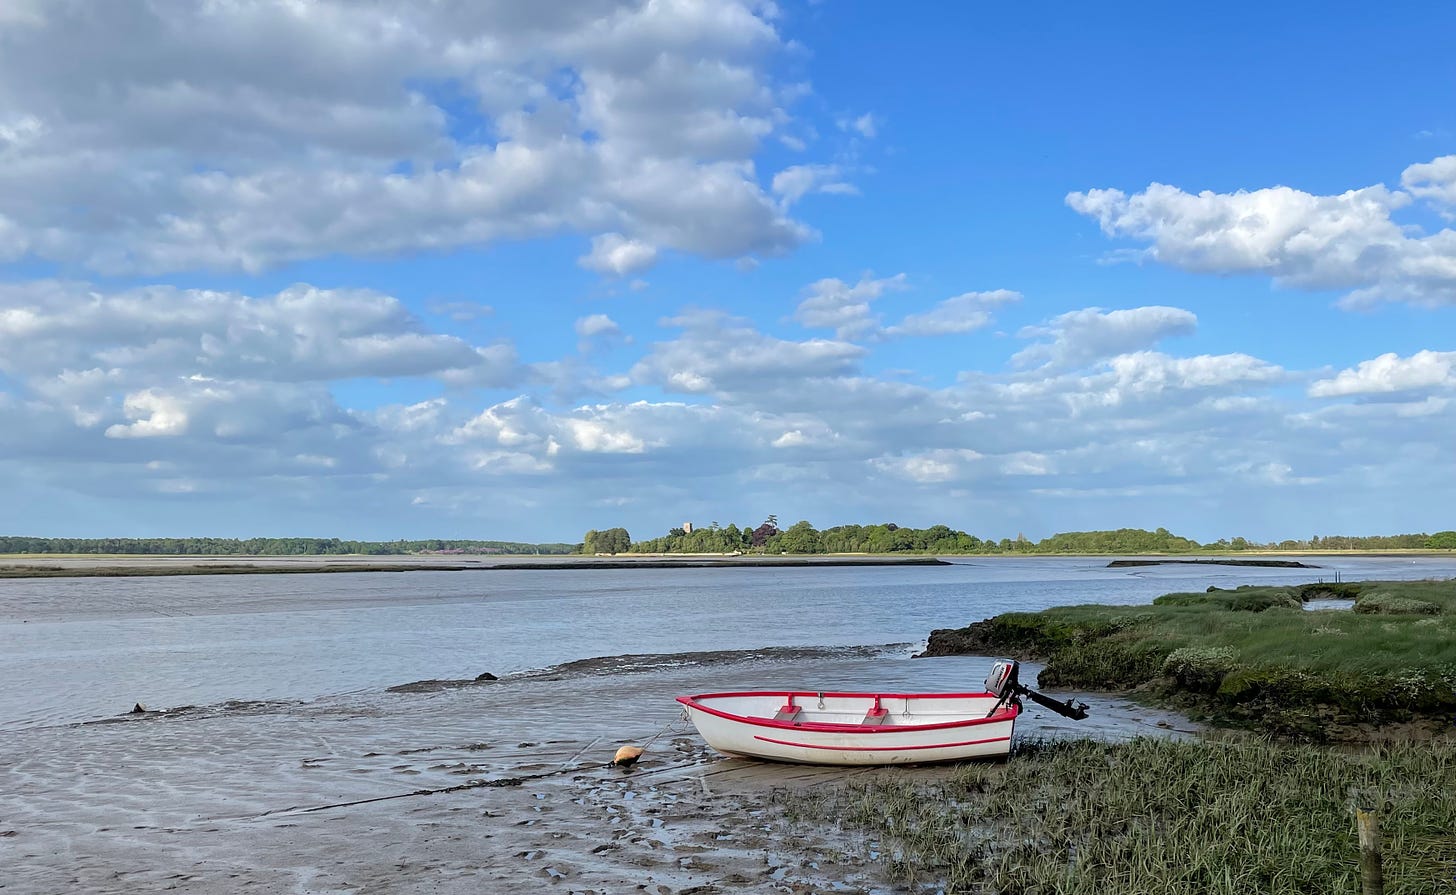 Looking towards St Botolph Iken situated on the only raised spit of land in an otherwise flat landscape with a red and white rowing boat in the foreground